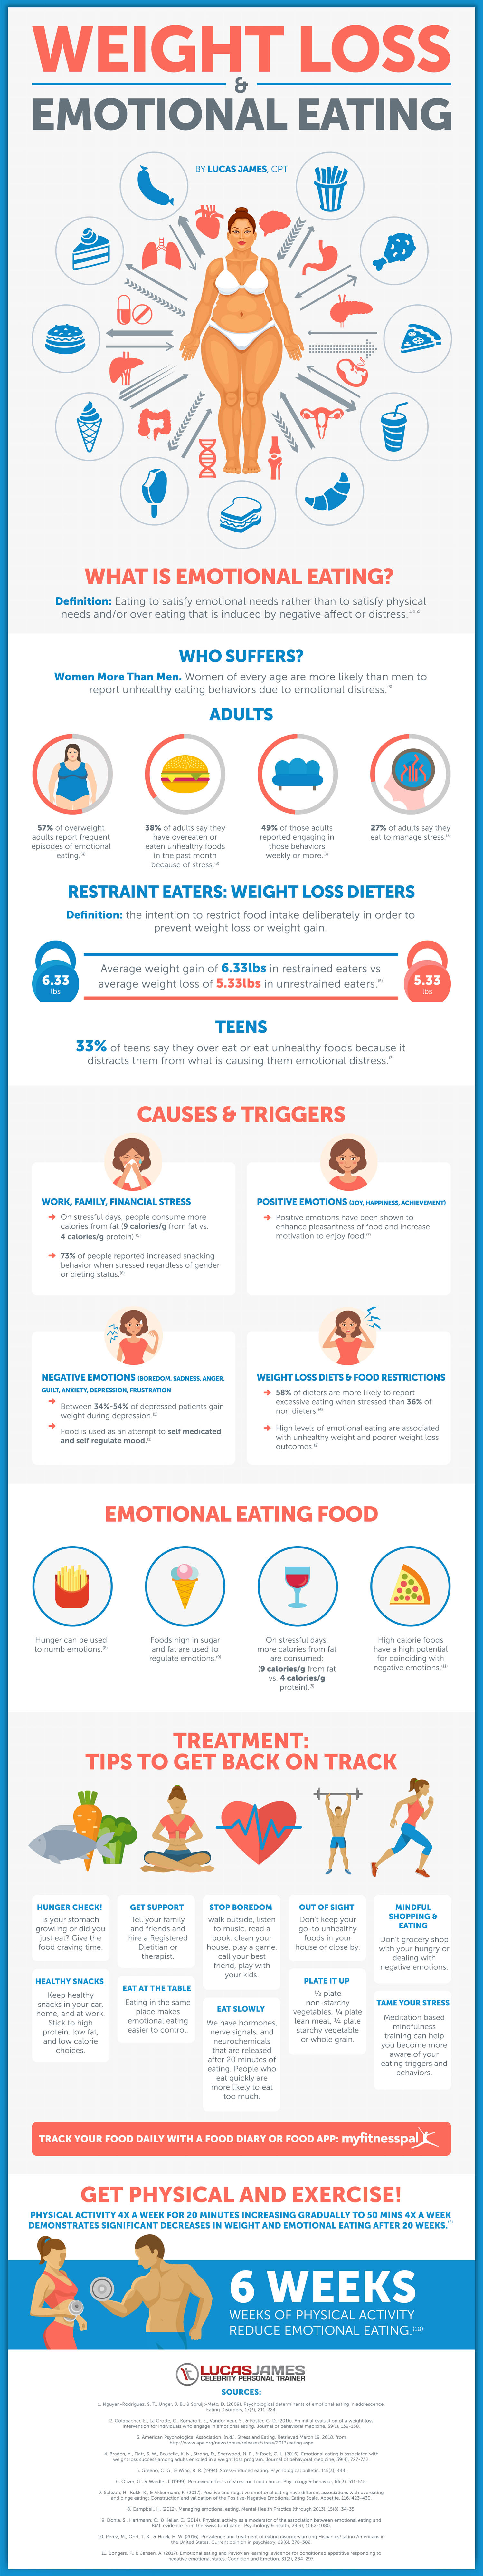 Weight Loss For Emotional Eating